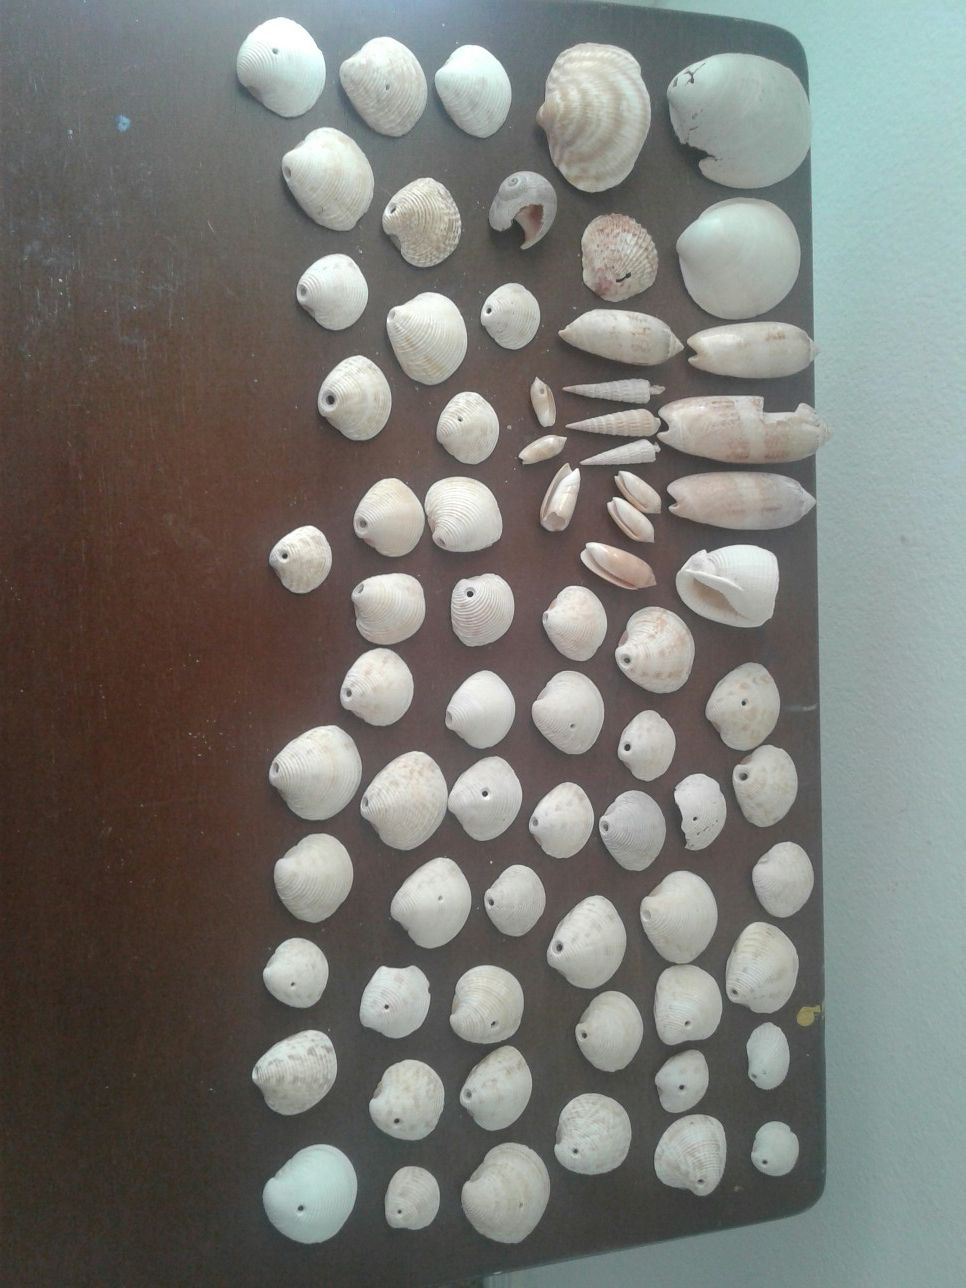 Mix of Florida Seashells, pre-drilled holes for decoration or jewlery